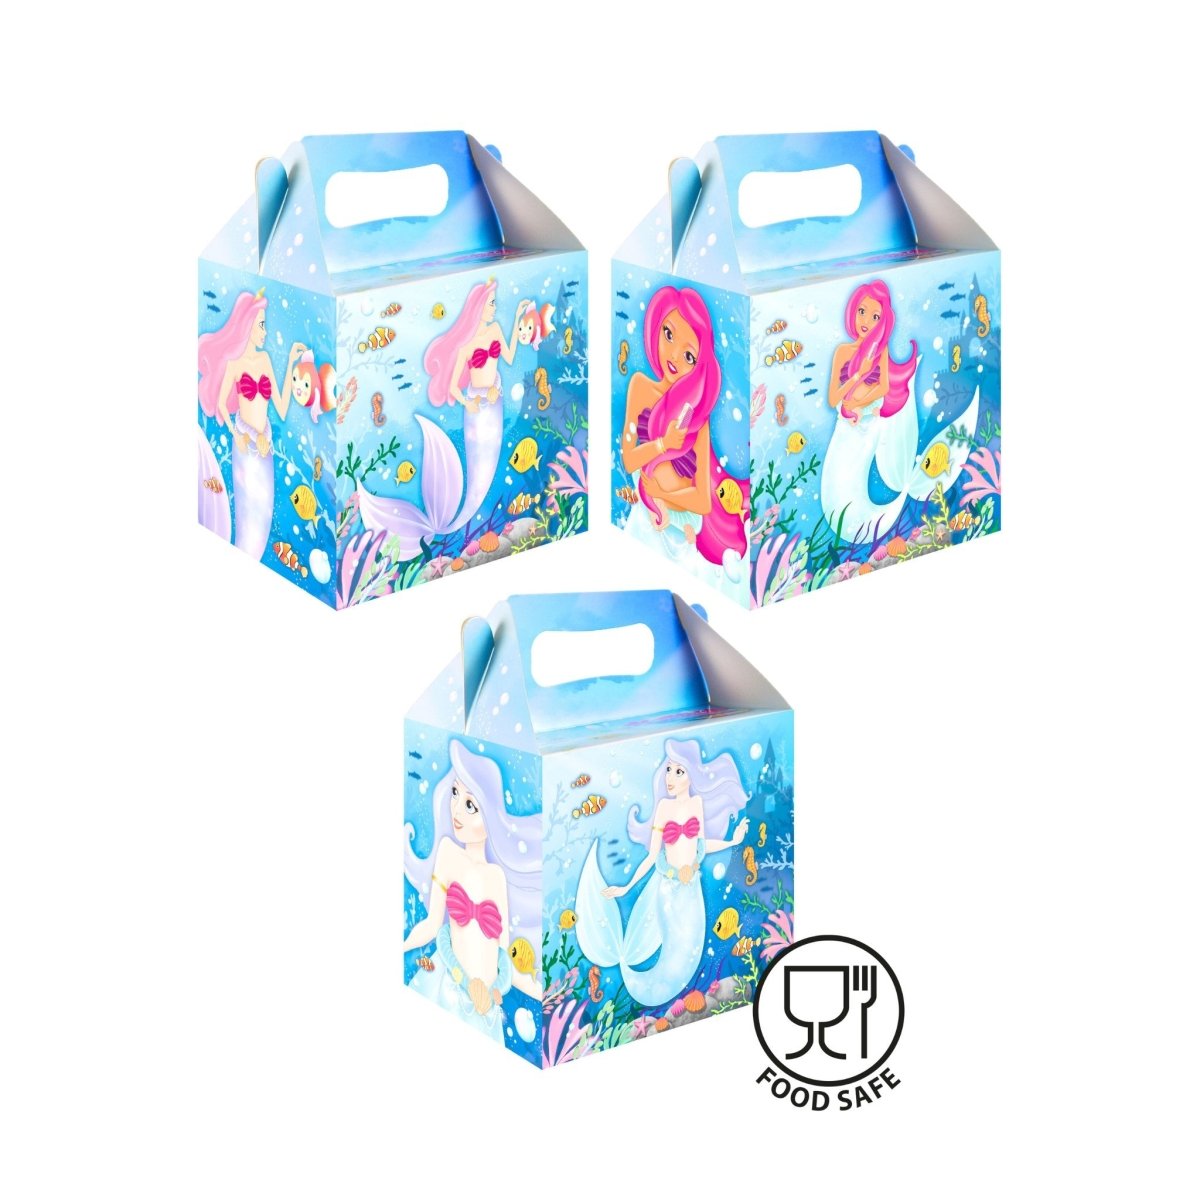 Mermaid Party Food Boxes - Kids Party Craft